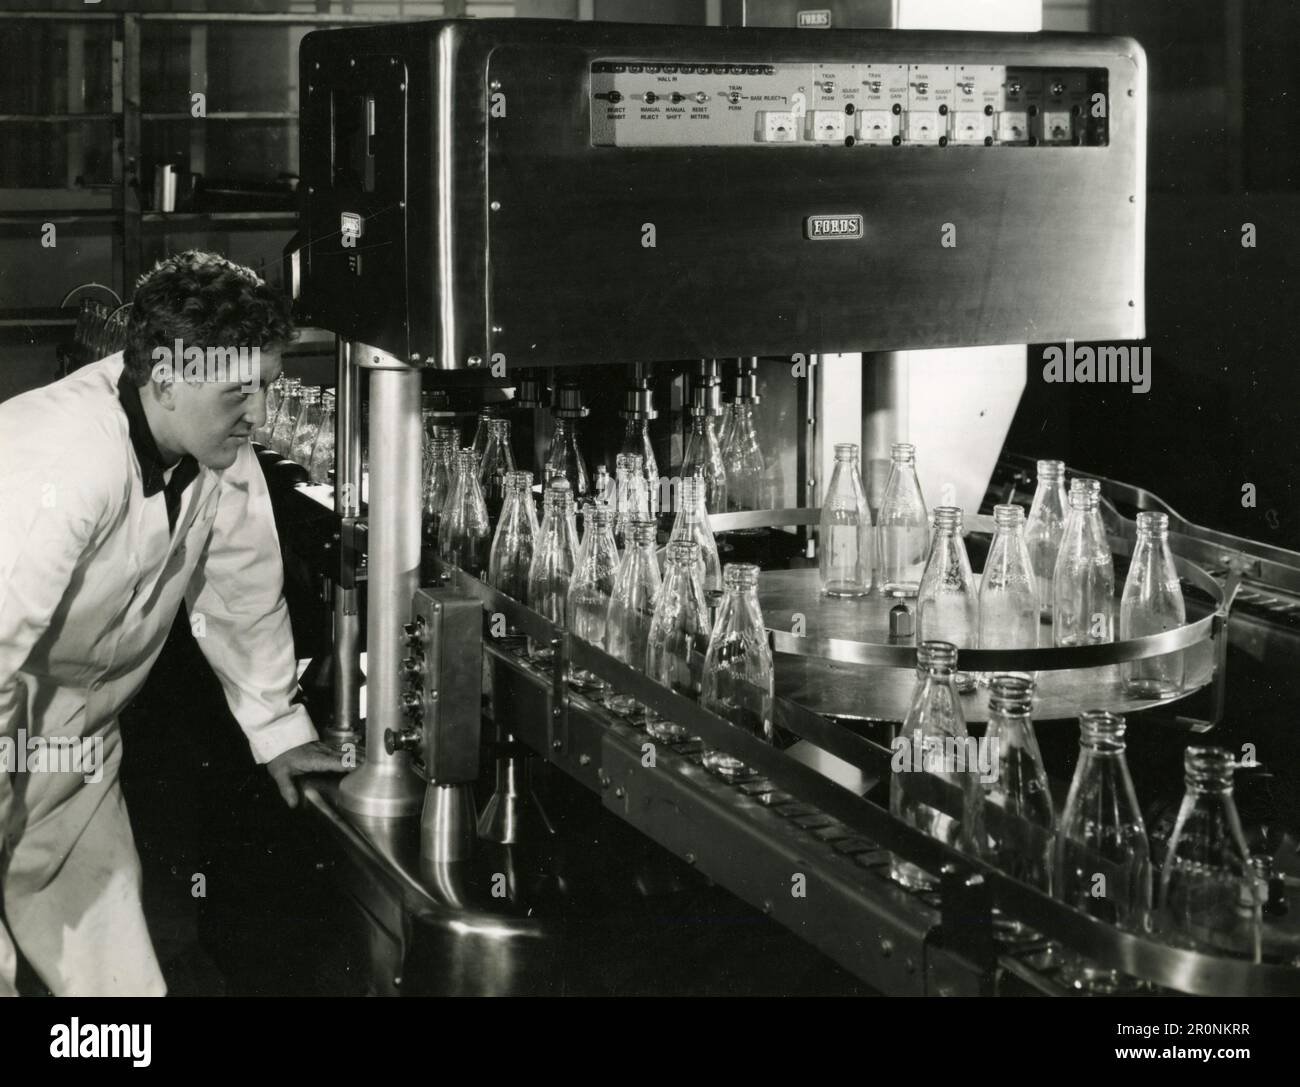 Milk bootles passing through the Automatic Bottle Inspection Machine to detect defects, UK 1966 Stock Photo